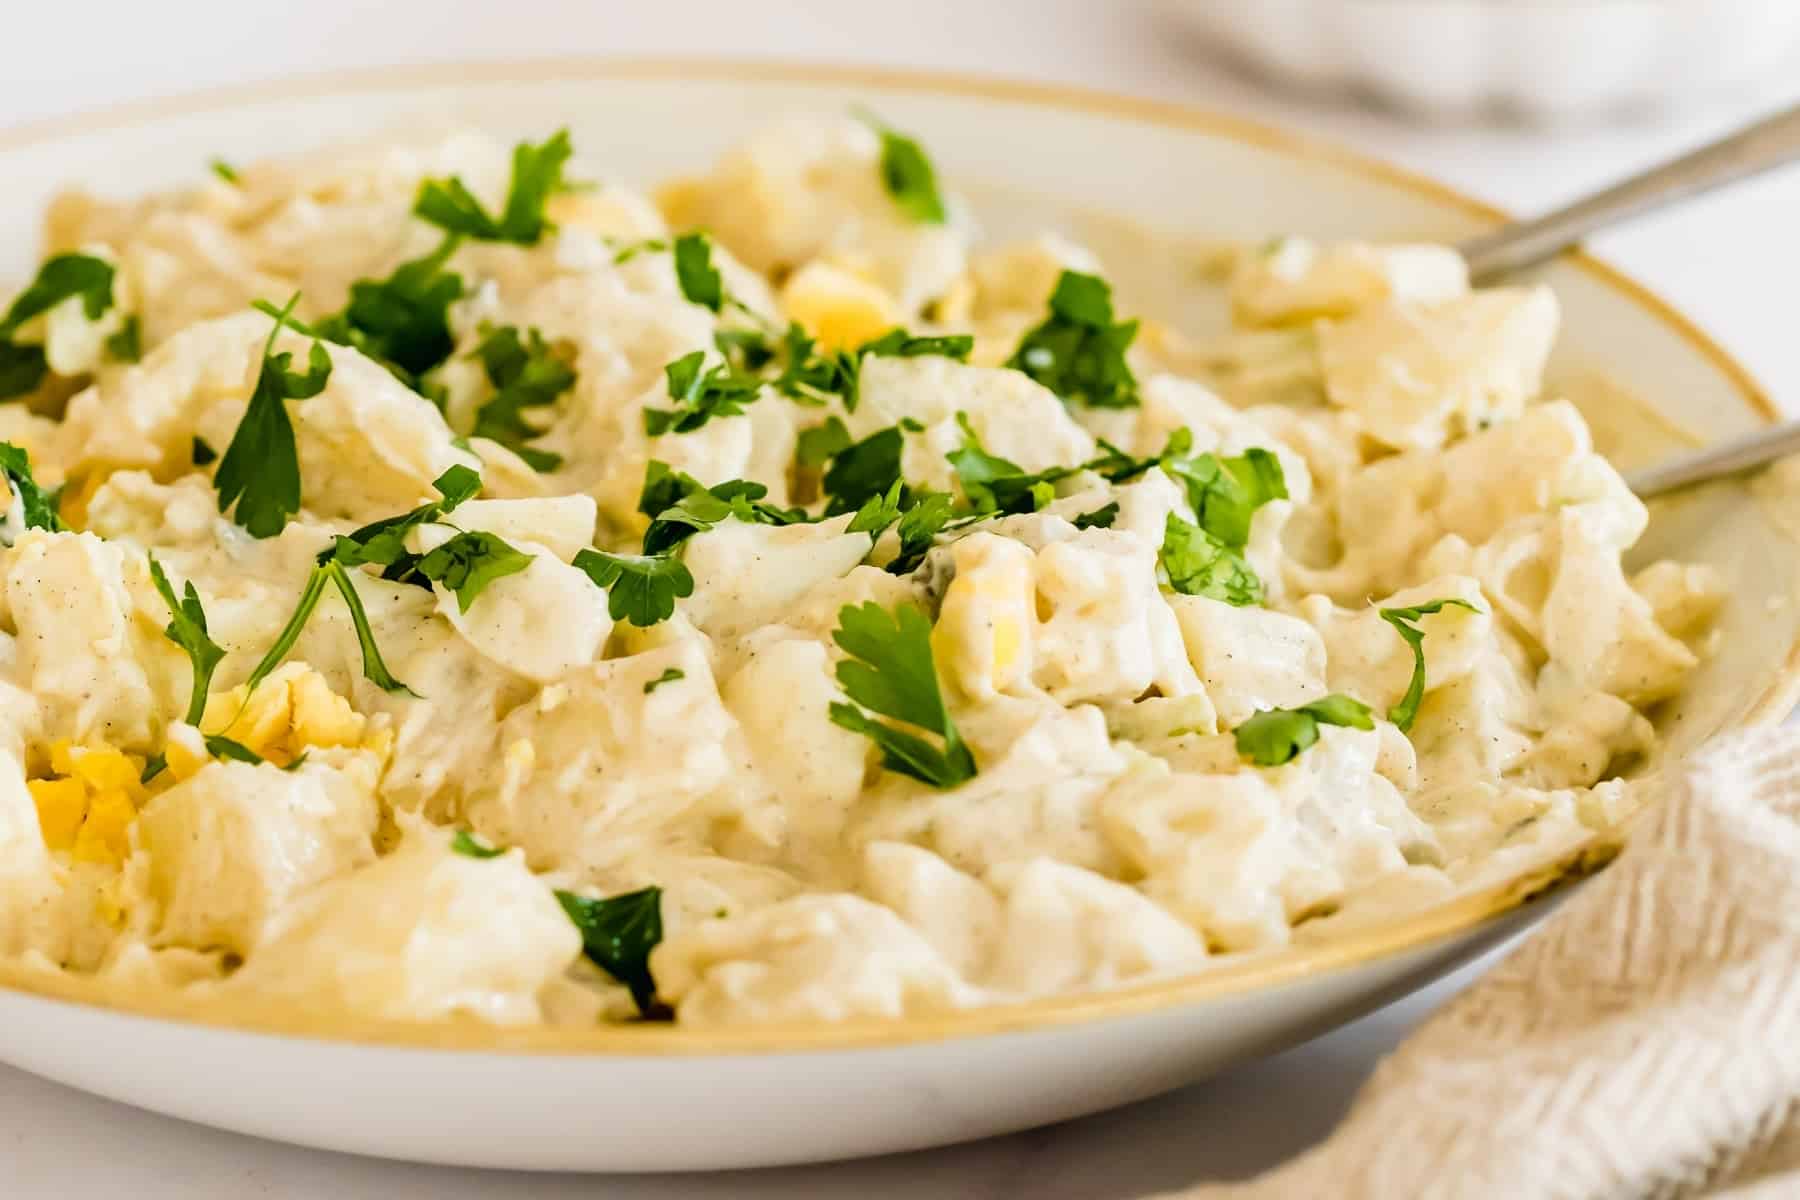 Instant Pot potato salad in a serving bowl garnished with parsley